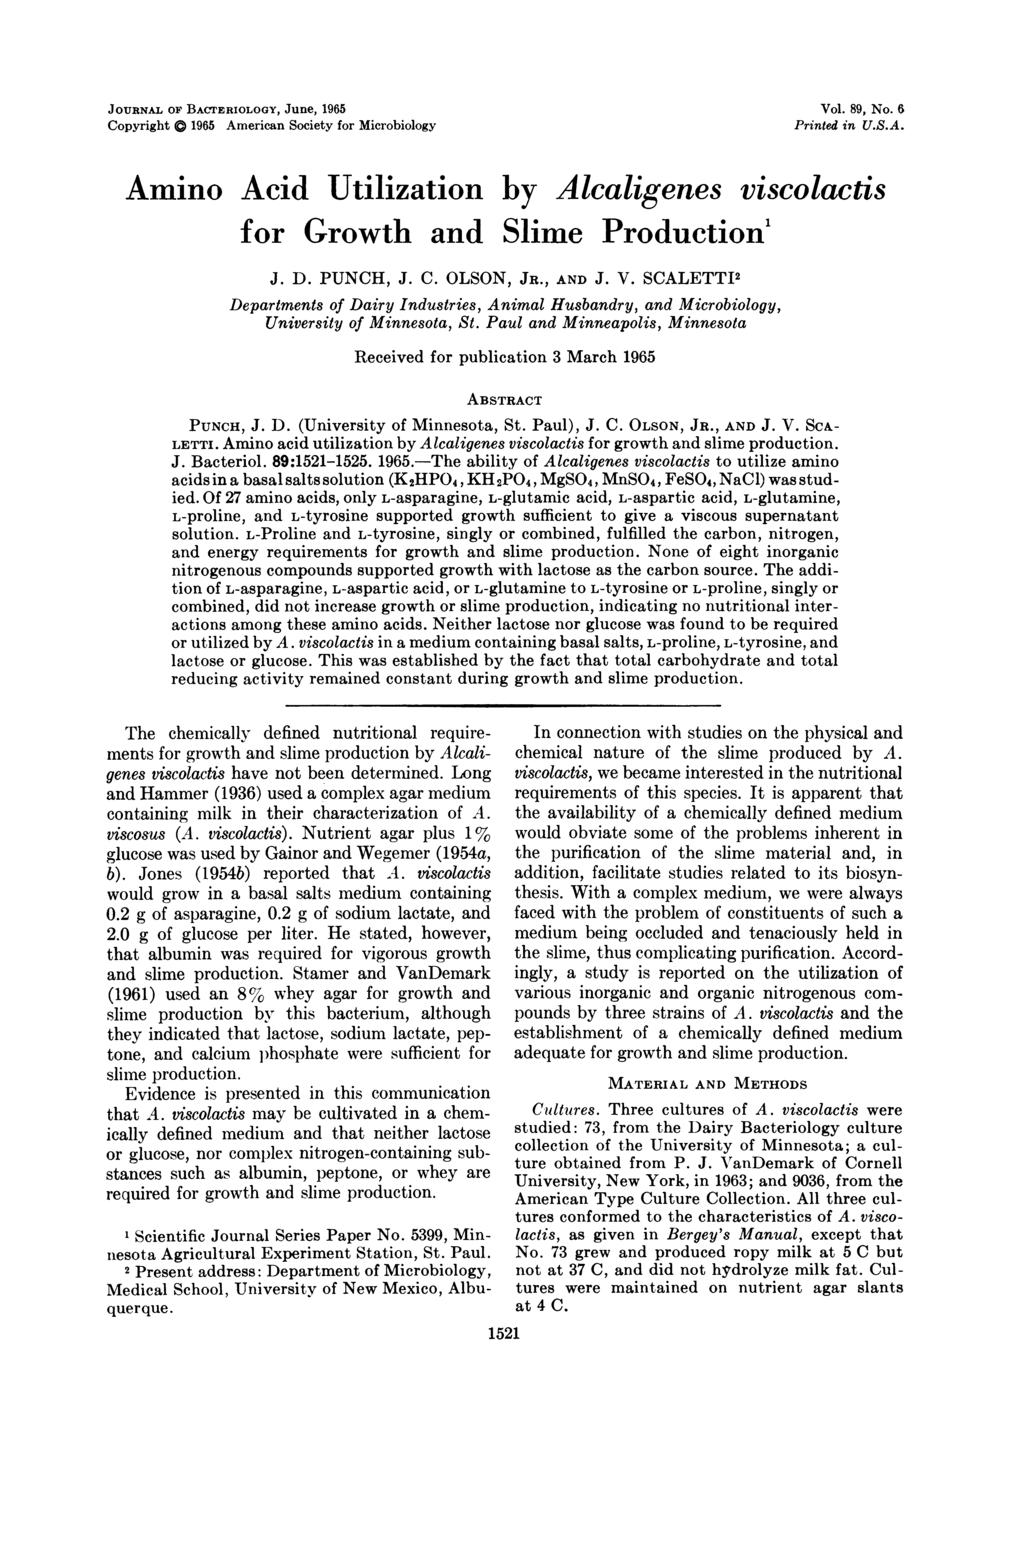 JOURNAL OF BACrERIOLOGY, June, 1965 Copyright a 1965 American Society for Microbiology Vol. 89, No. 6 Printed in U.S.A. Amino Acid Utilization by Alcaligenes viscolactis for Growth and Slime Production1 J.